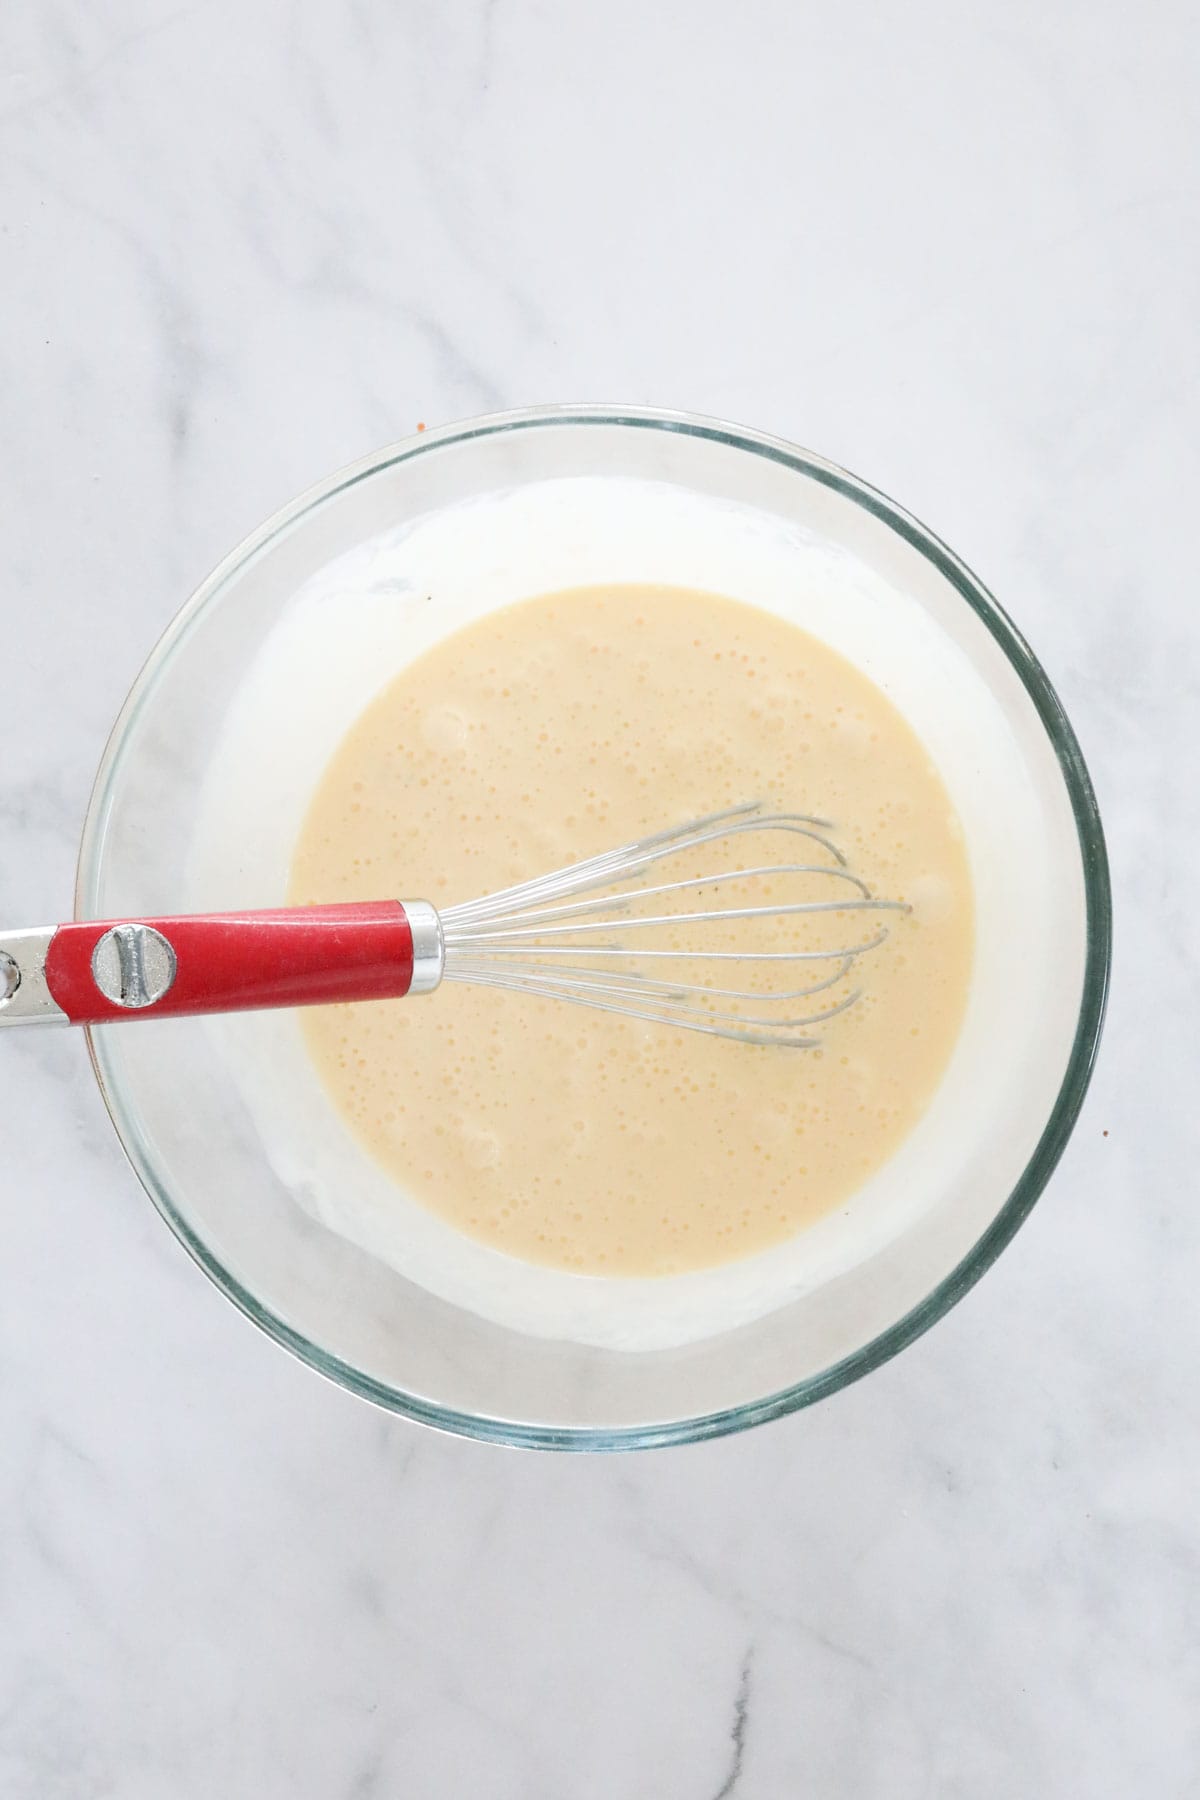 Eggs and cream whisked together in a mixing bowl.